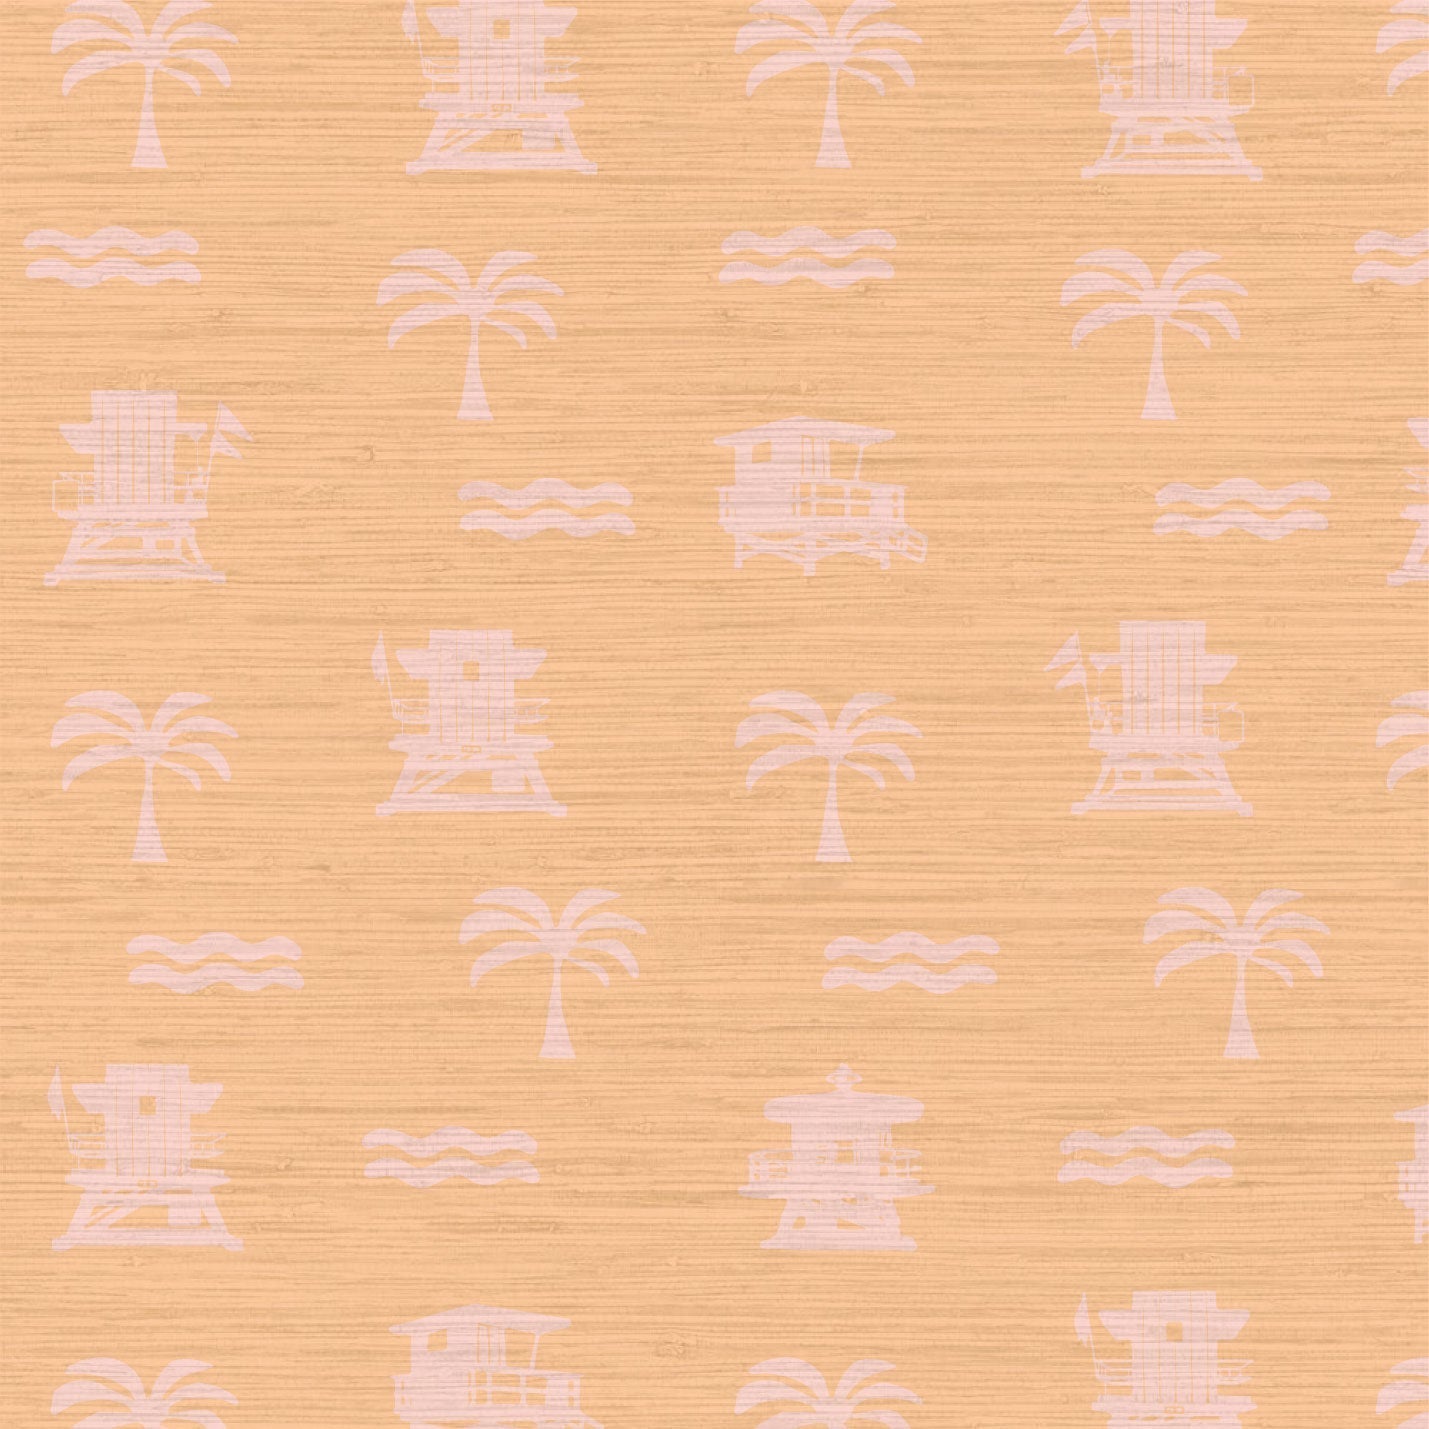 Grasscloth Natural Textured Eco-Friendly Non-toxic High-quality Sustainable practices Sustainability Interior Design Wall covering wallpaper grid seaside coastal seashore waterfront vacation home styling retreat relaxed beach vibes beach cottage shoreline oceanfront nautical tropical ocean waves palm tree lifeguard stand mini print custom interior design beach house sunset orange coral light pink baby pink